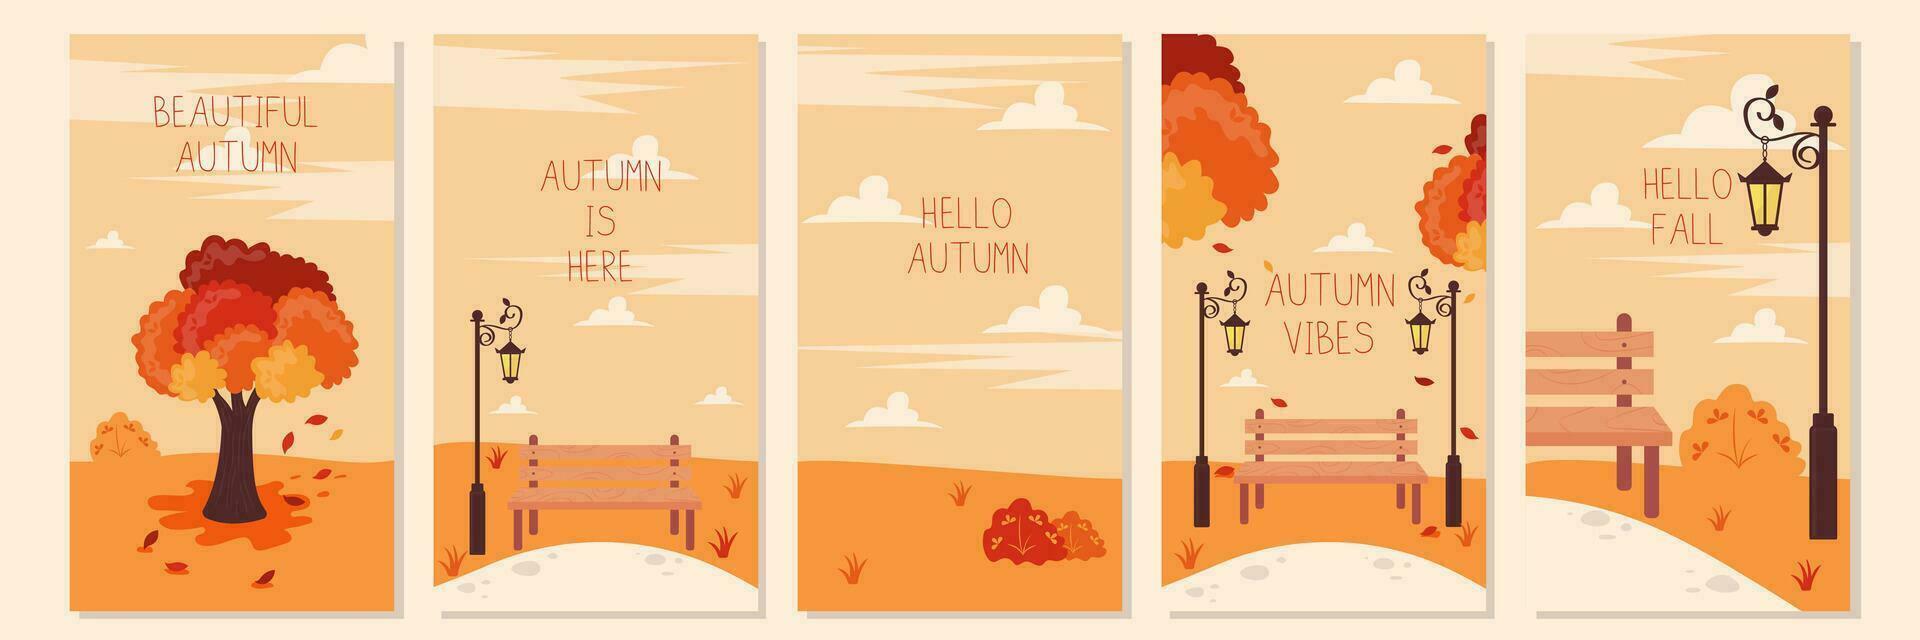 Vector Set of Autumn Landscapes Vertical Templates Backgrounds Park Bench Street Lights and Autumn Trees